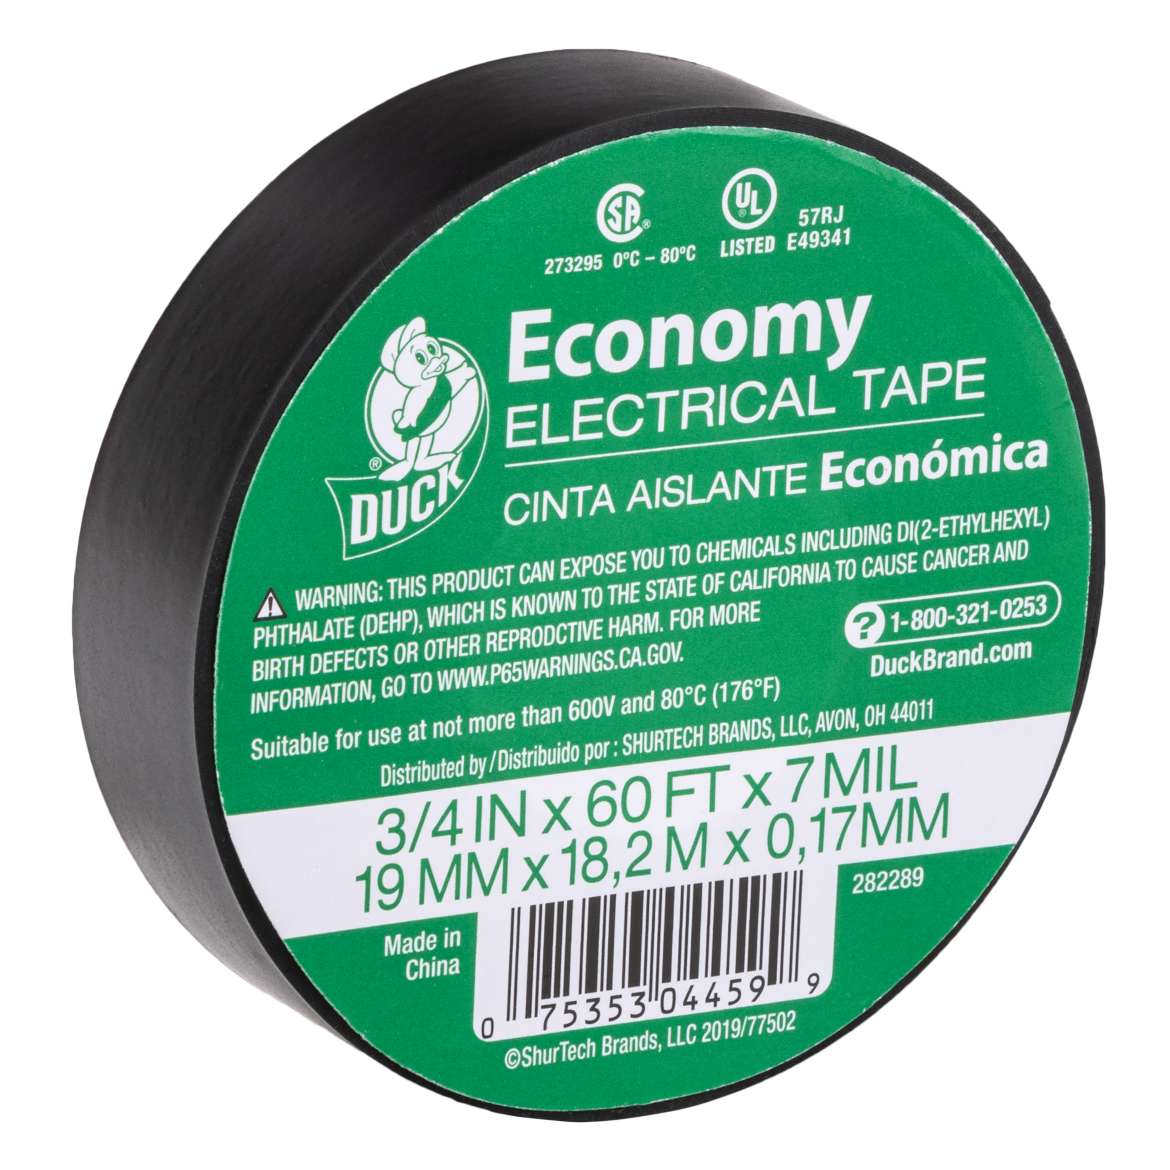 Auto Electrical Tape Image